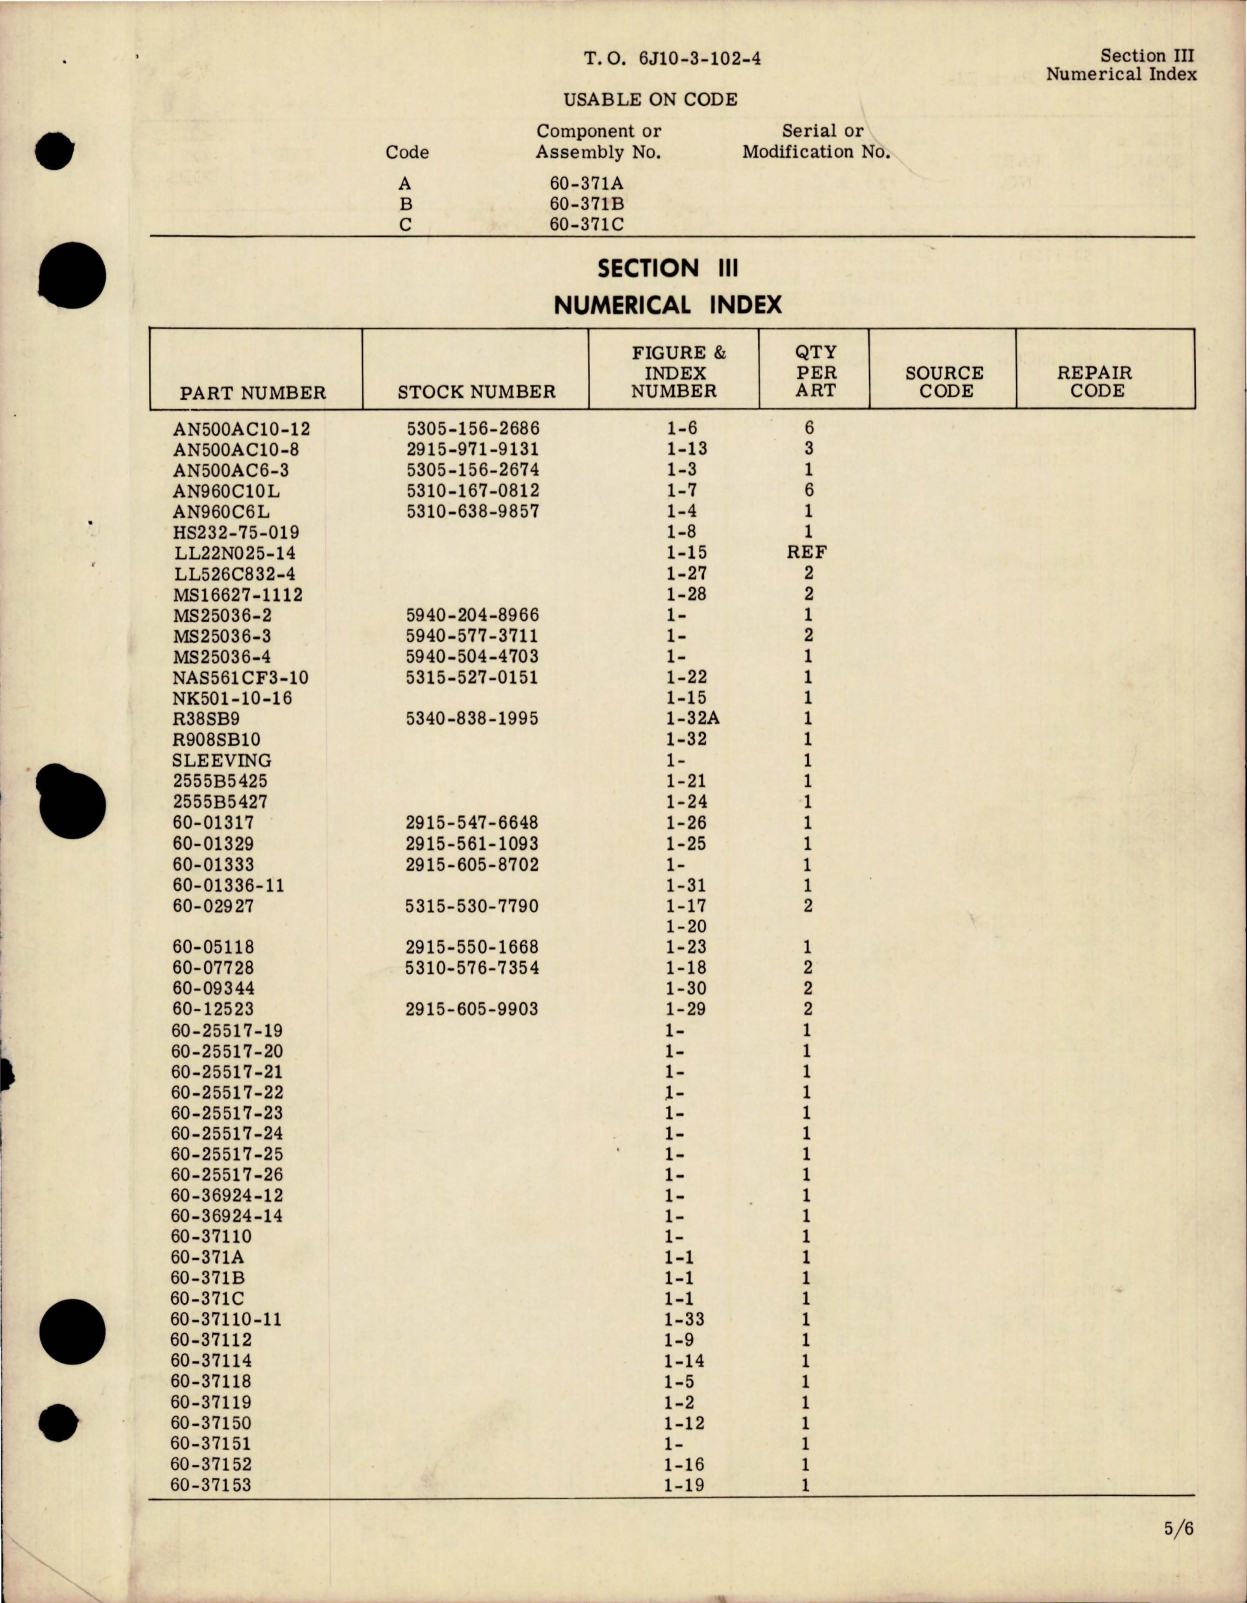 Sample page 5 from AirCorps Library document: Illustrated Parts Breakdown for Fuel Booster Pump Assembly - Parts 60-371A, 60-371B, 60-371C 